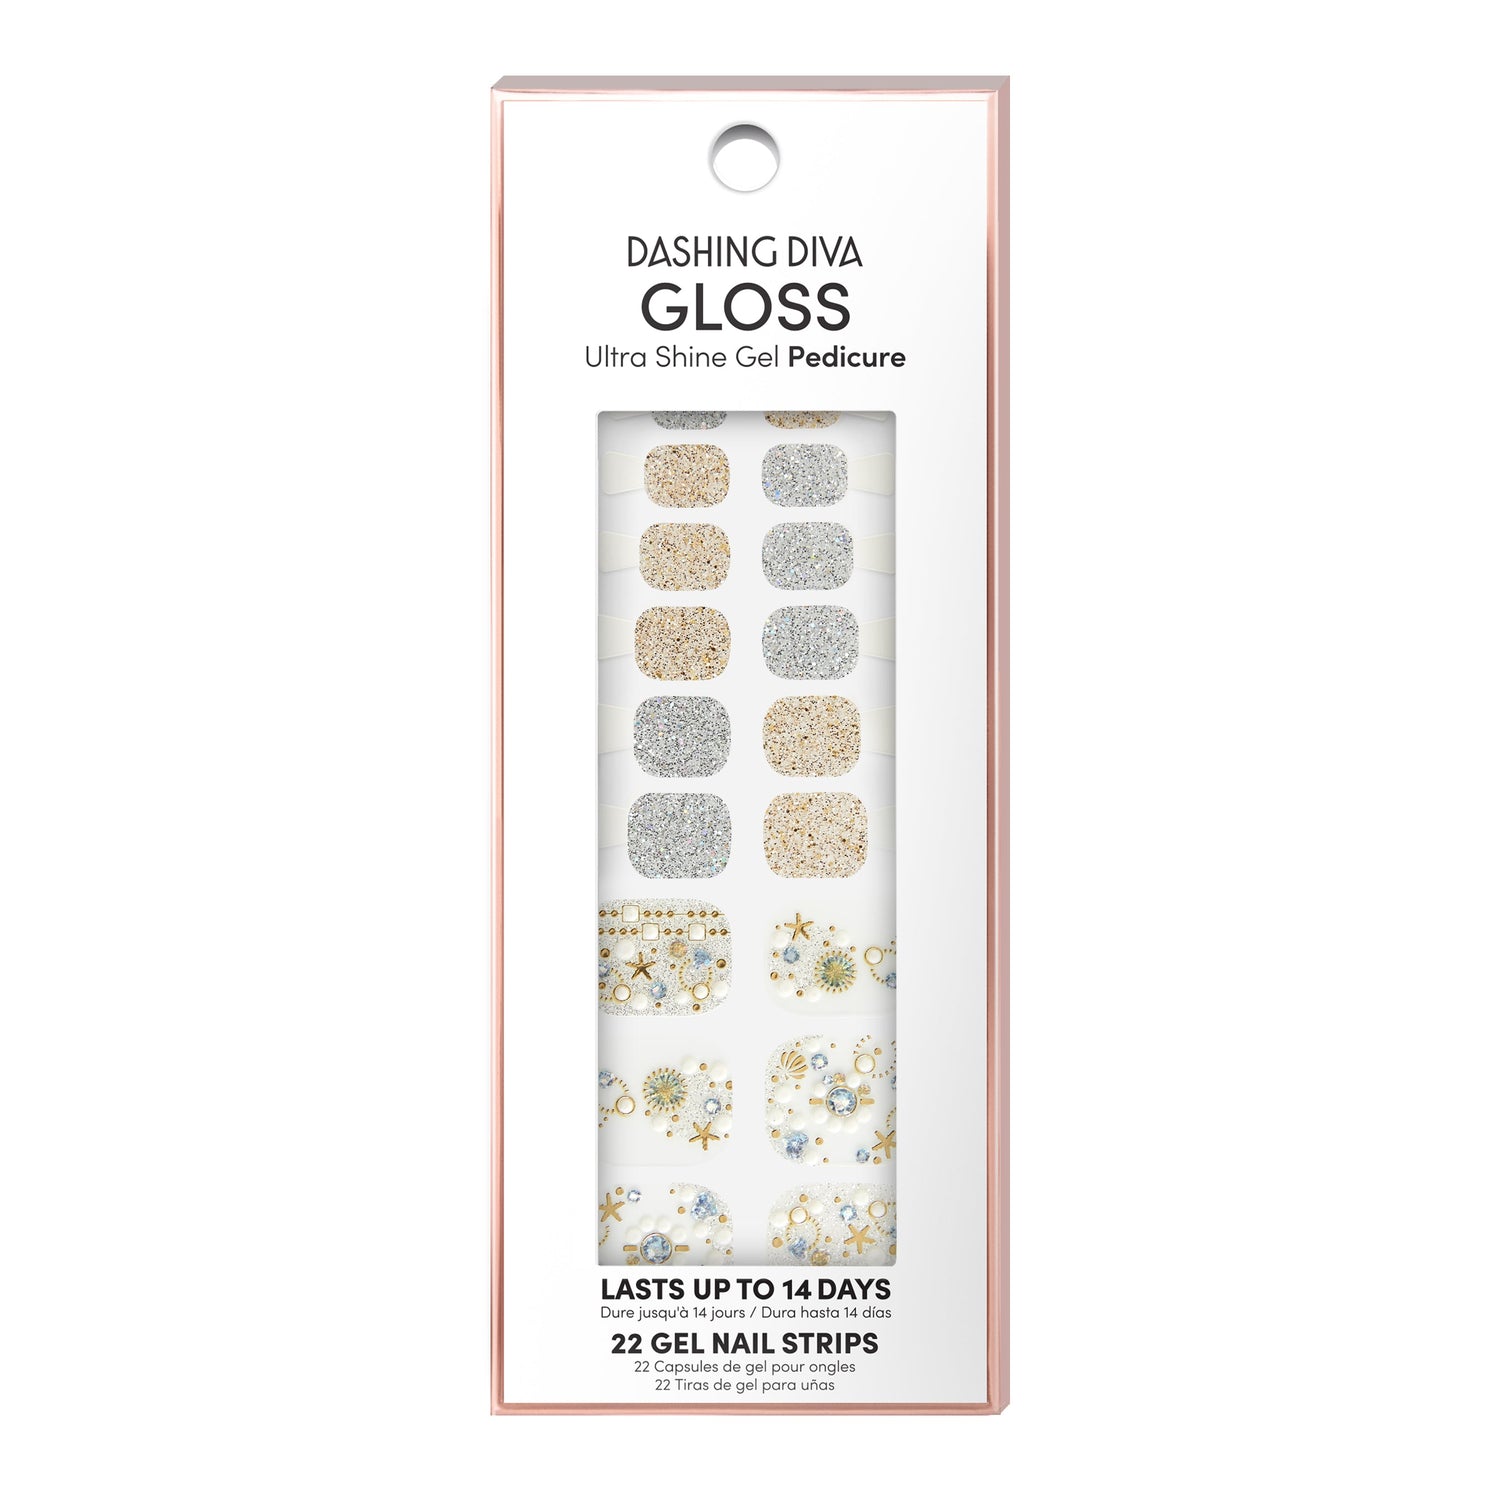 Dashing Diva GLOSS pedicure silver and gold glitter gel pedi strips with ocean and starfish accents.